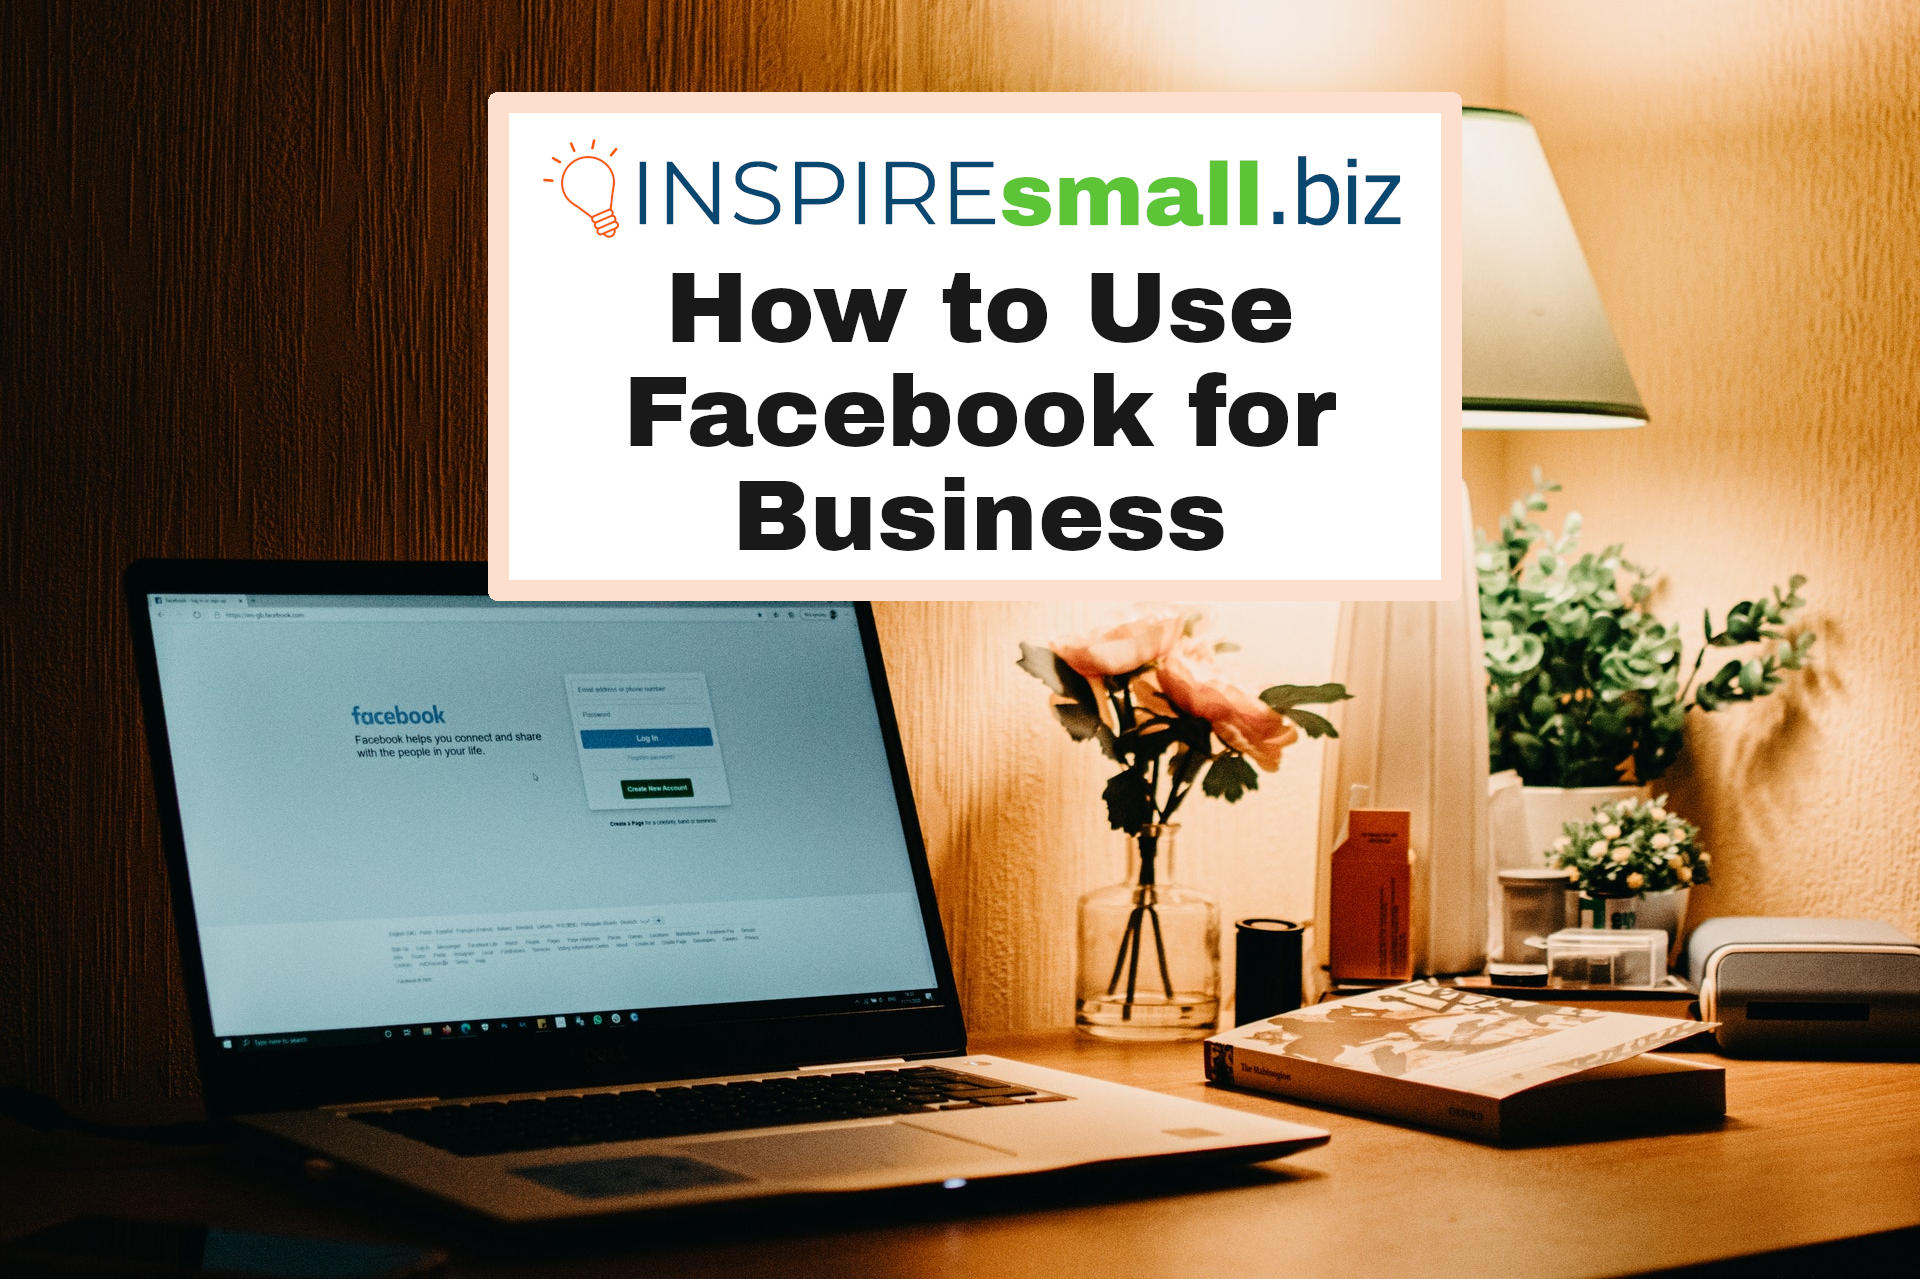 How to use Facebook for Business from INSPIREsmall.biz over a background of a laptop on a desk next to a lamp and small flower vase.